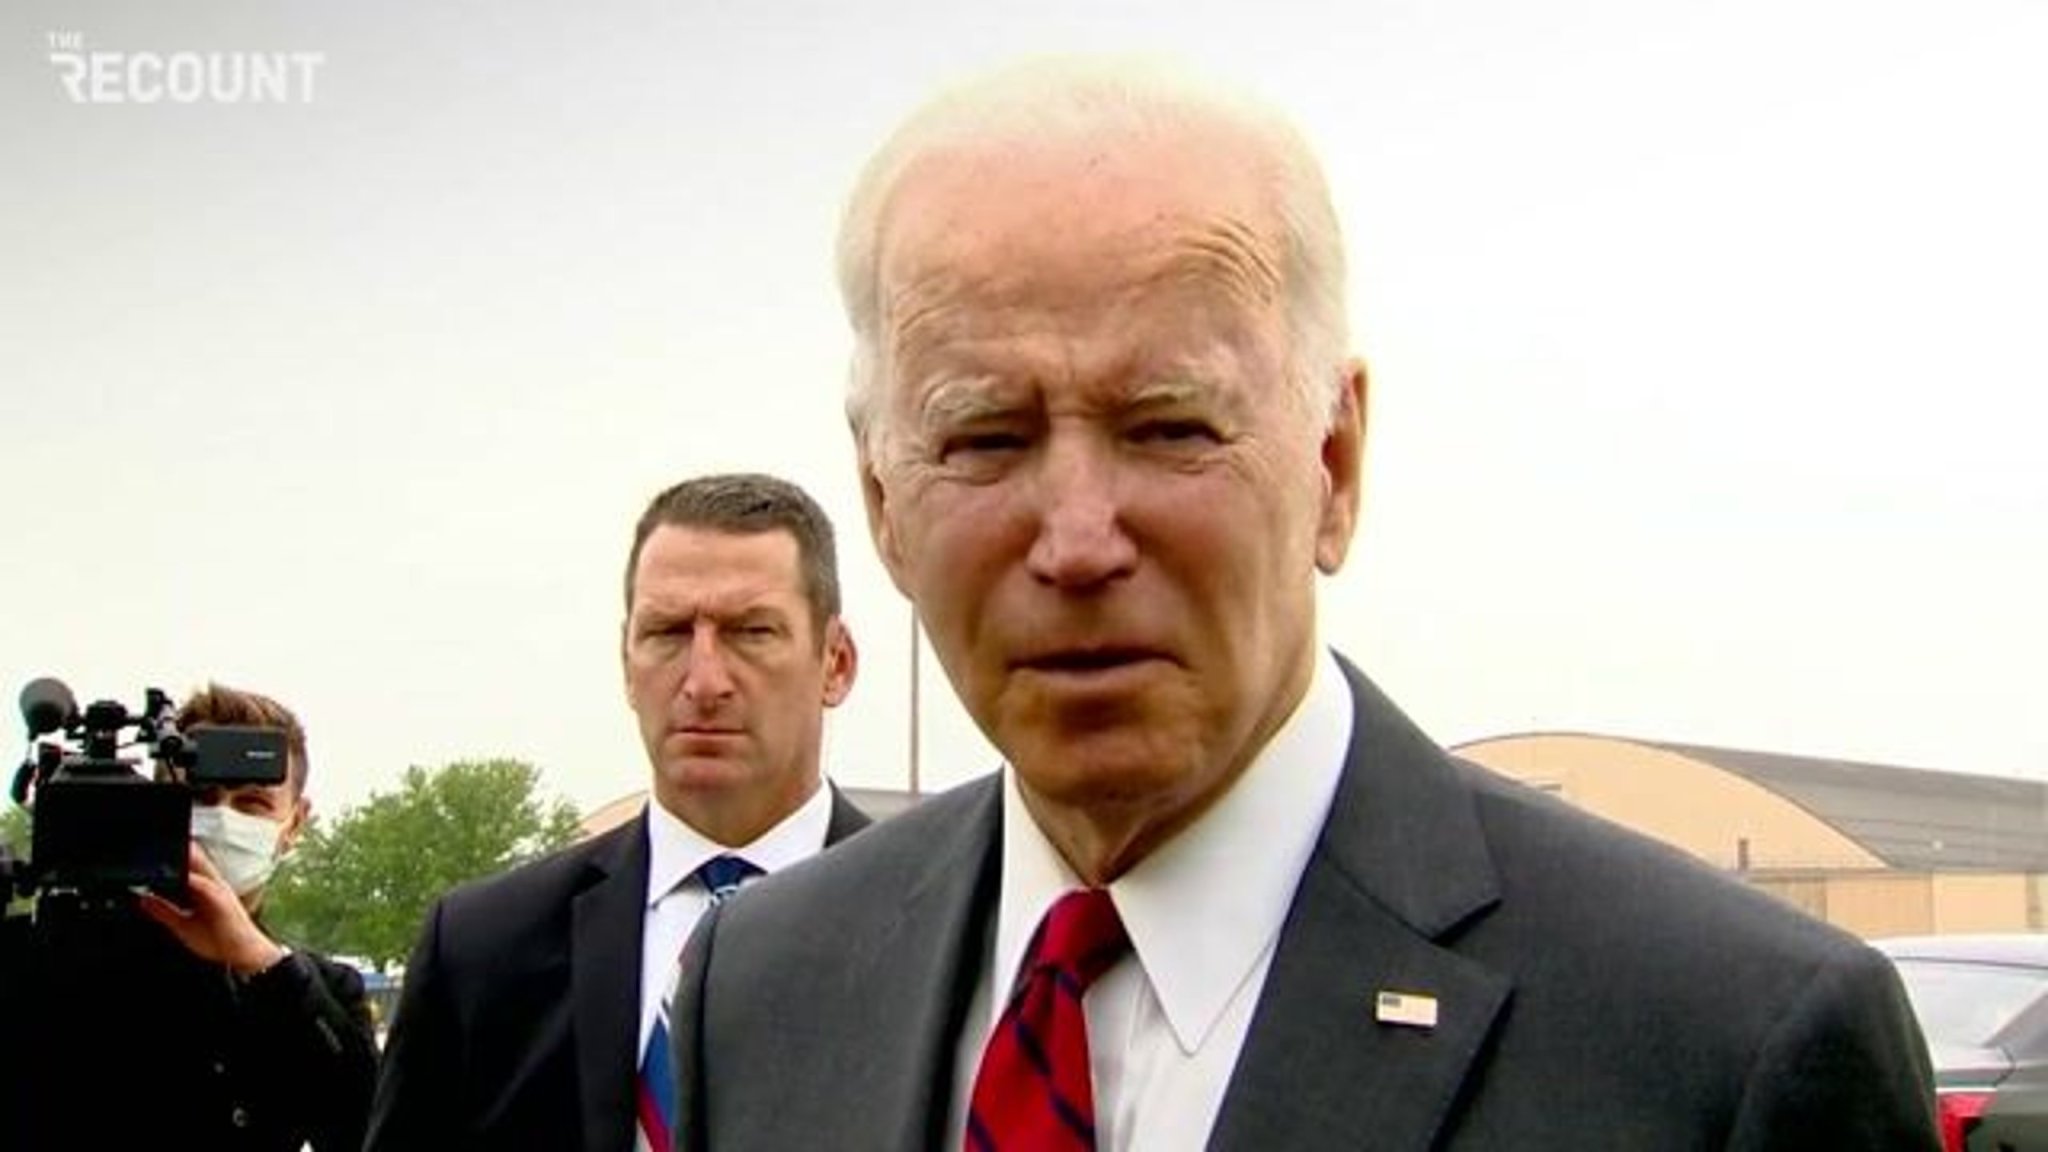 Asked if the Senate should end the filibuster to codify Roe, Pres. Biden: "I'm not prepared to make those judgements."